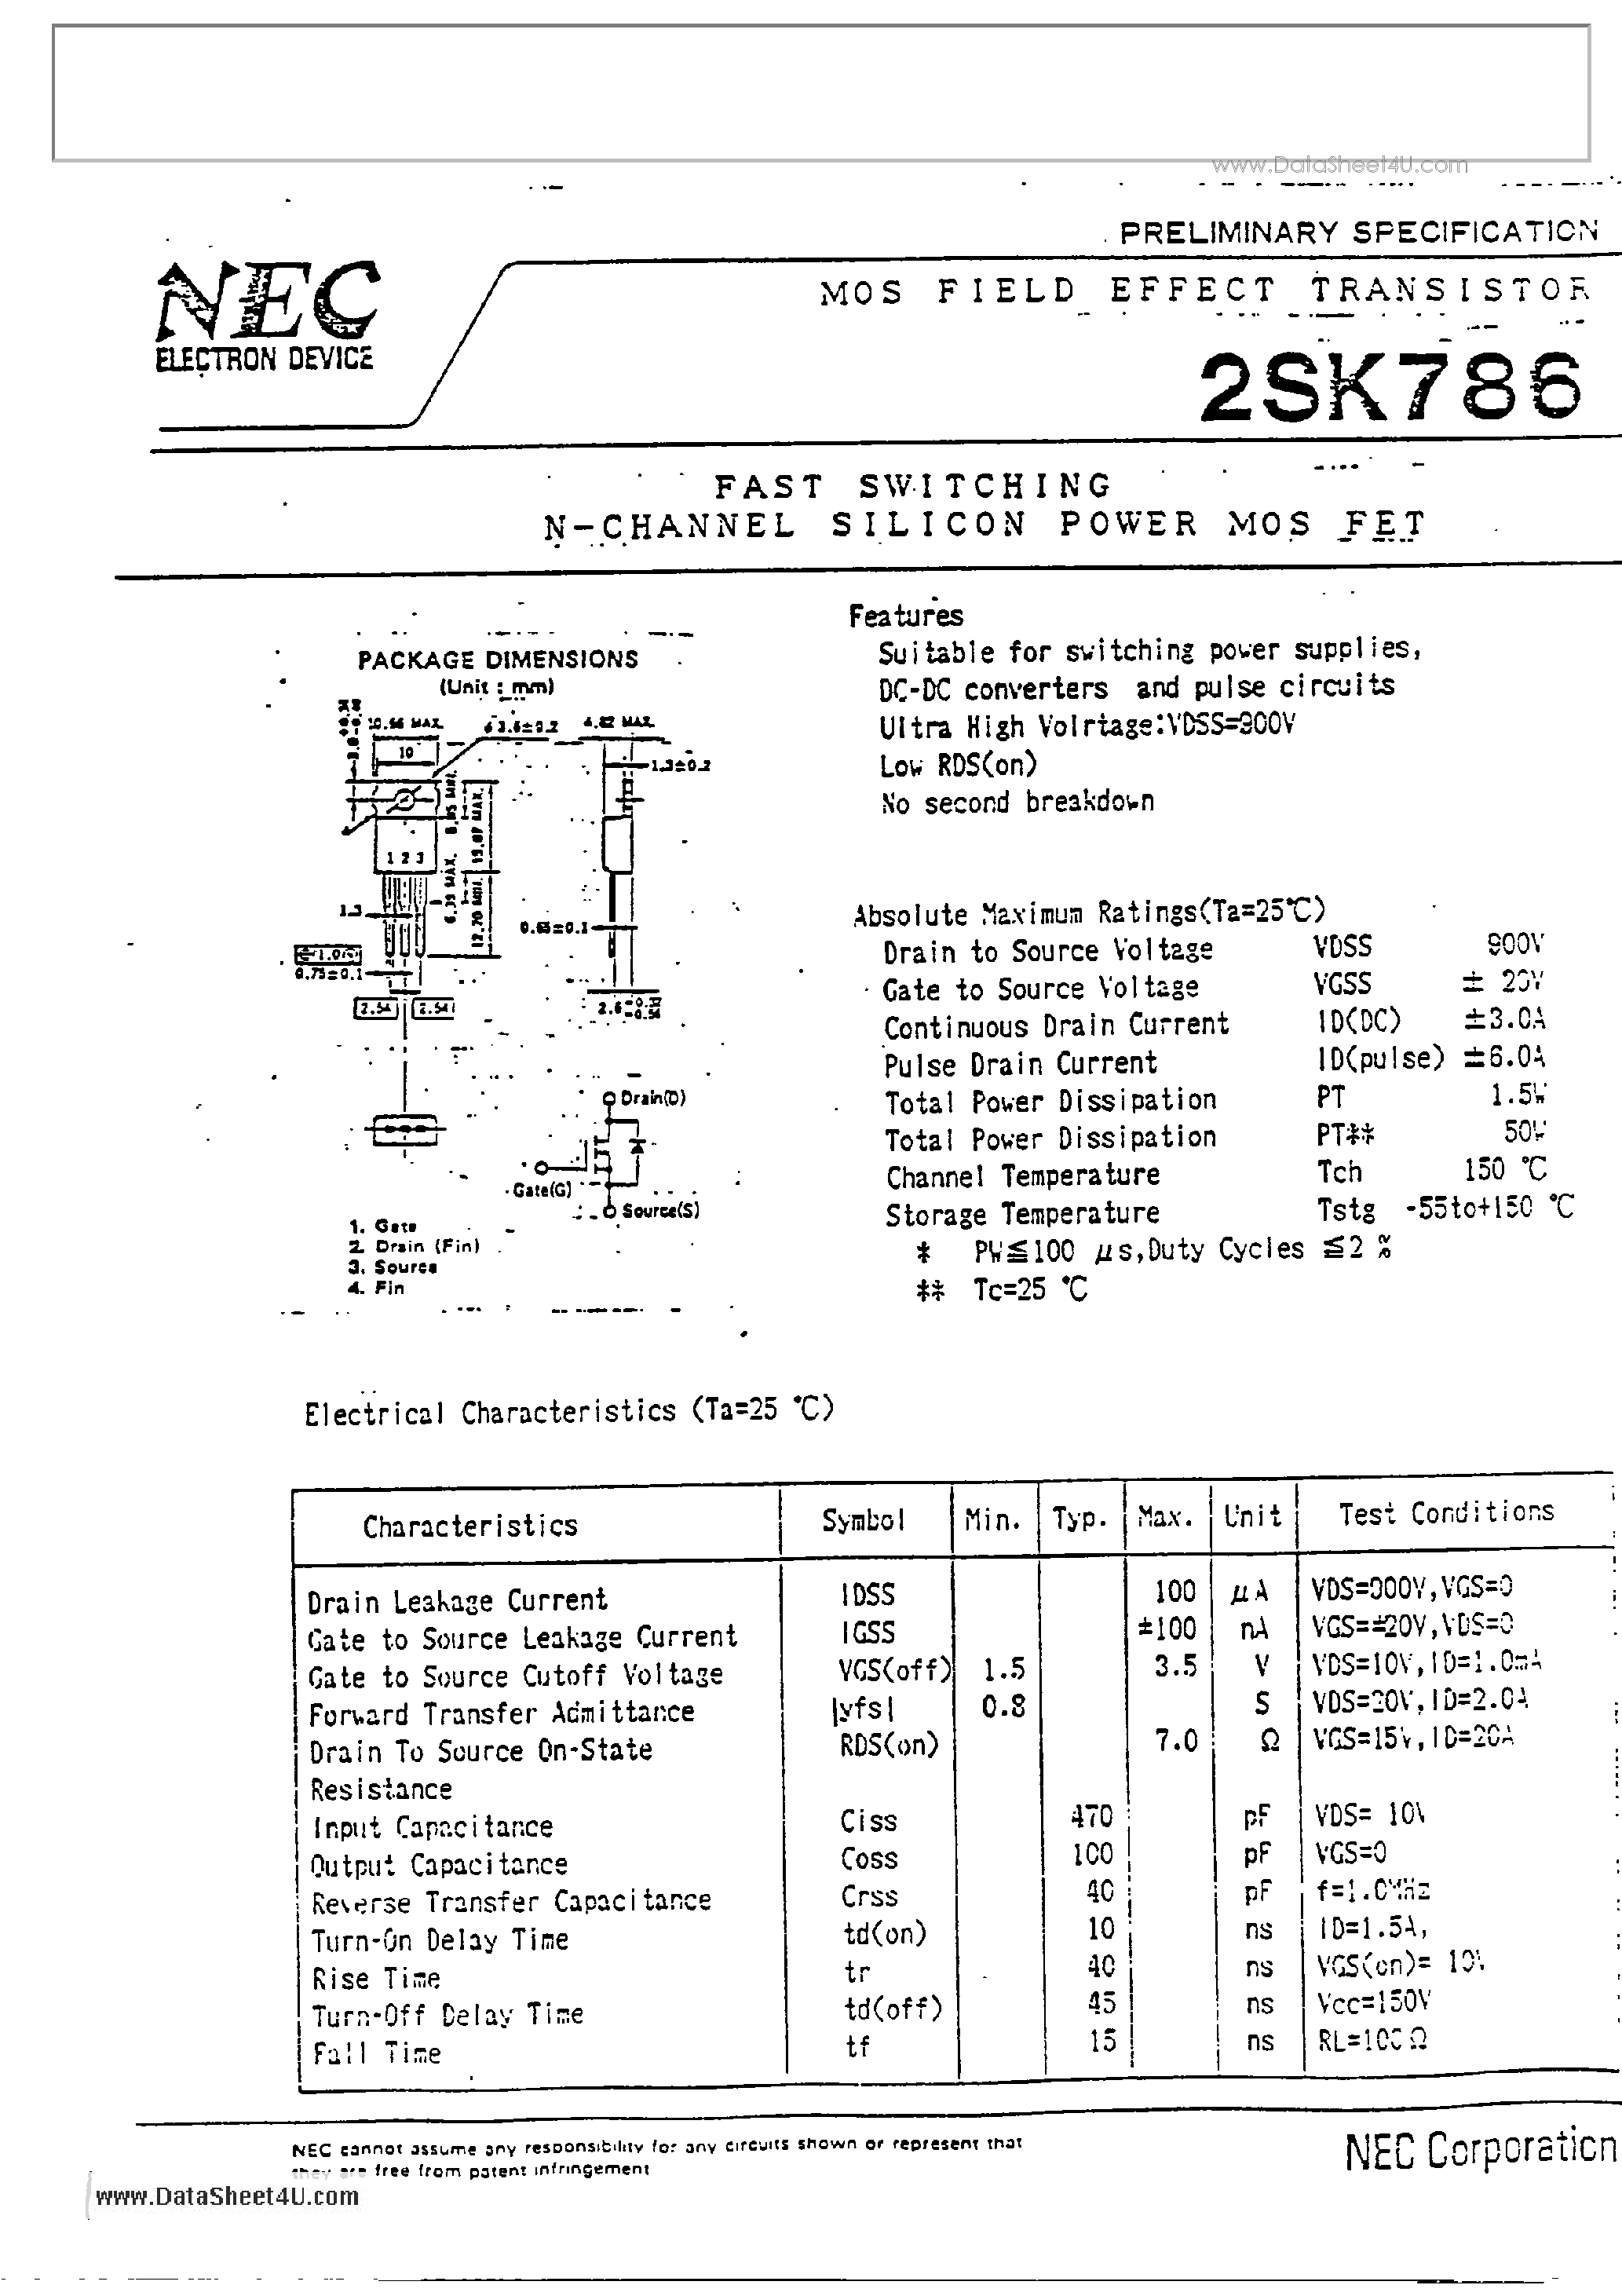 Datasheet K786 - Search -----> 2SK786 page 1